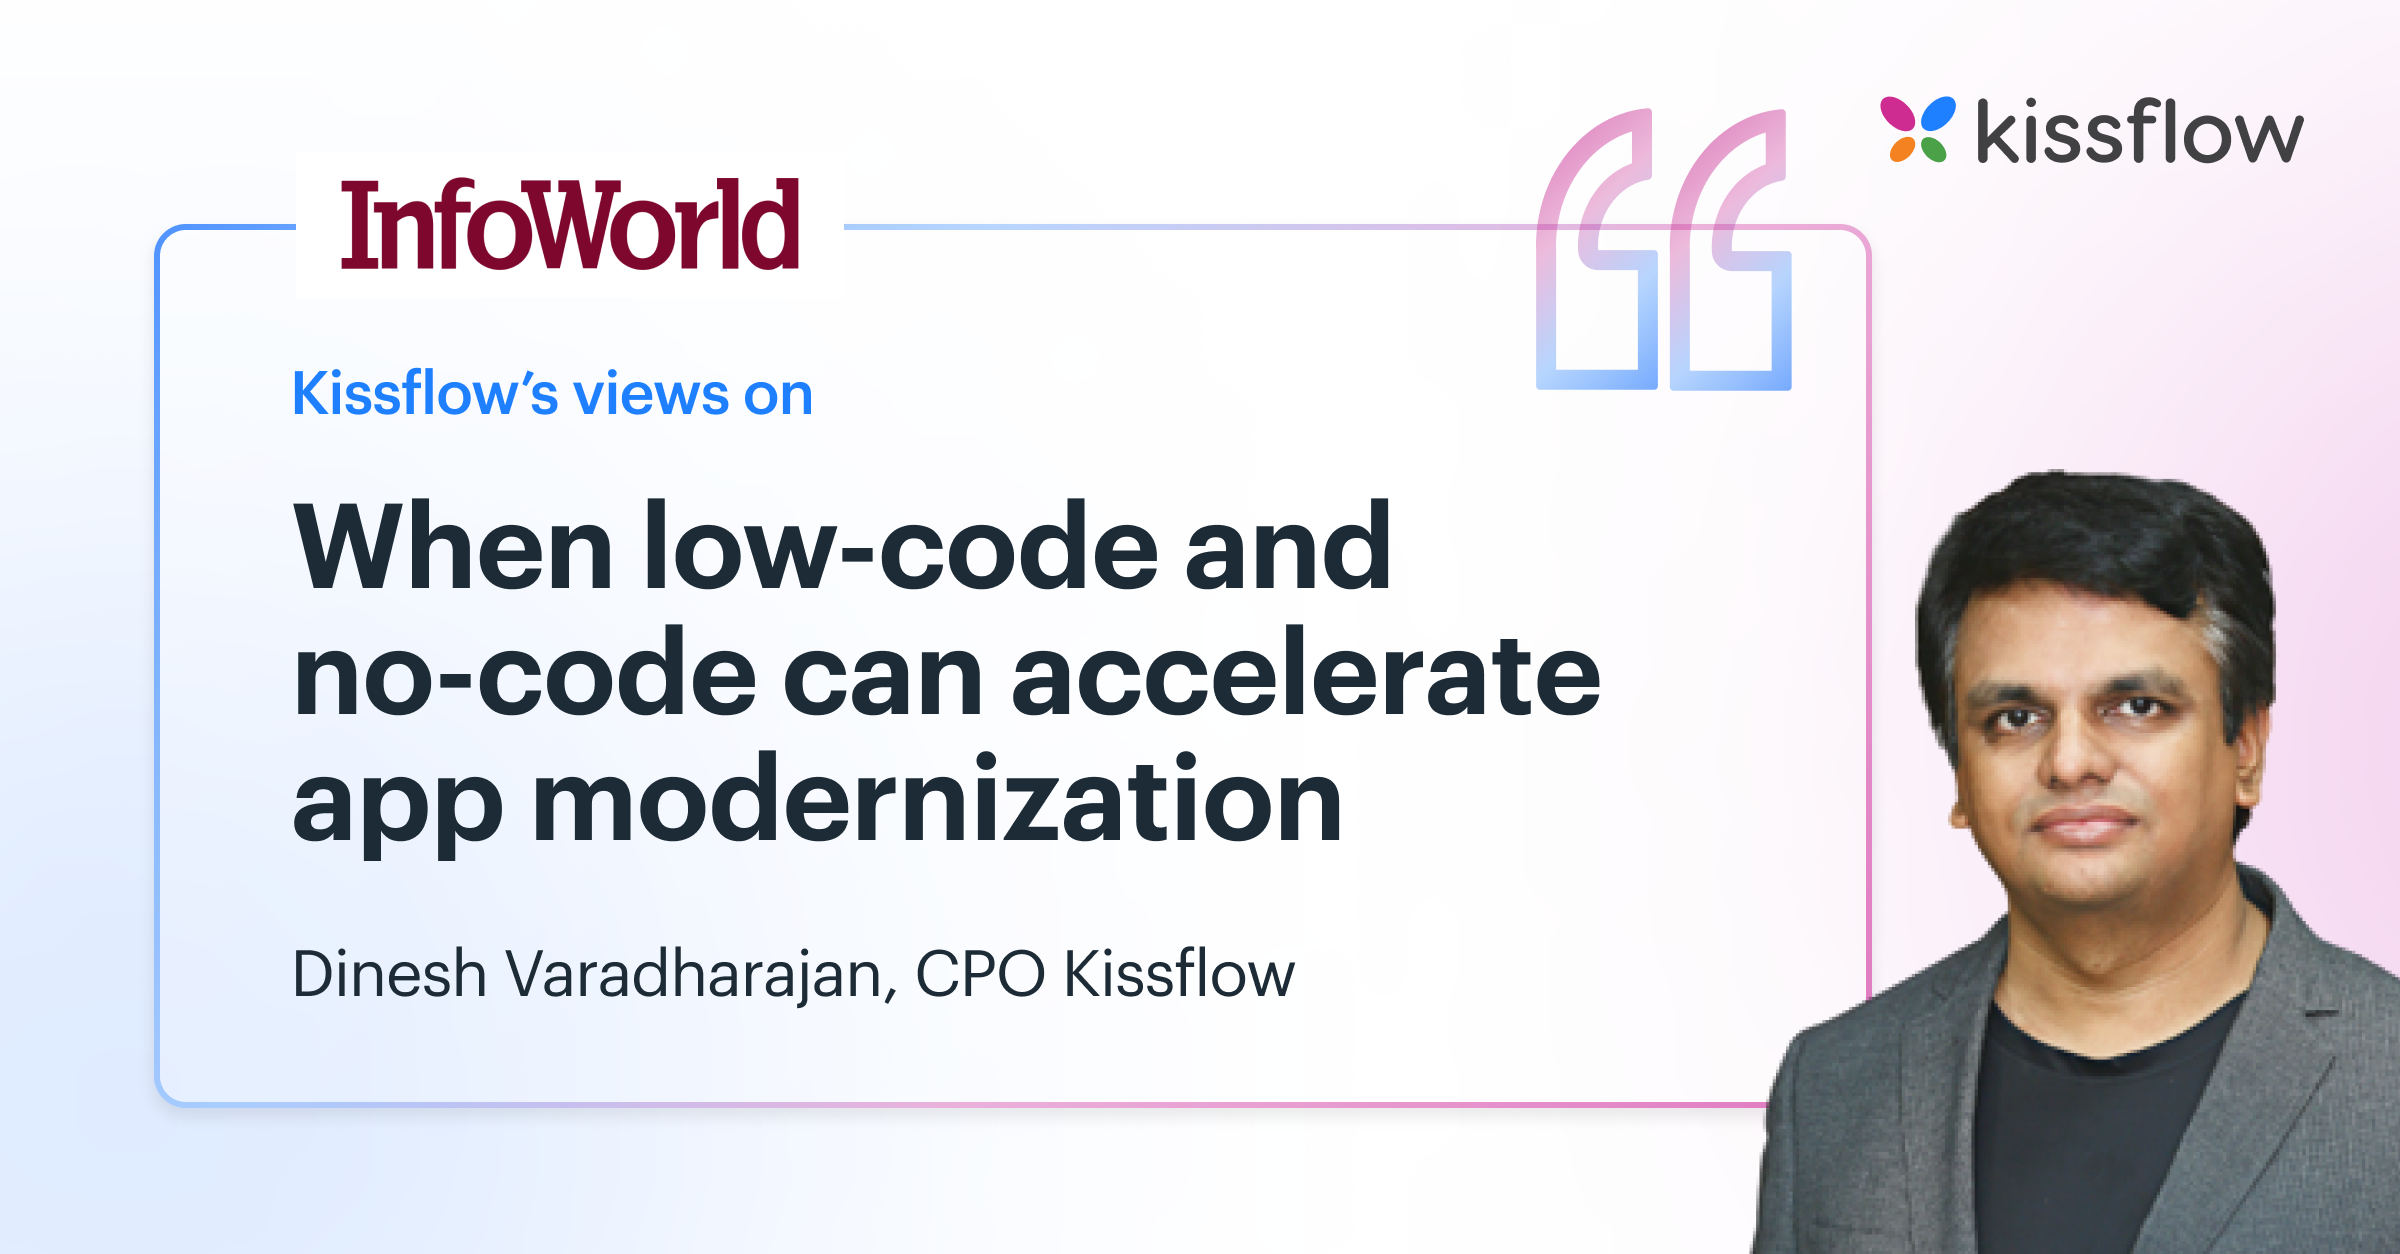 When low-code and no-code can accelerate app modernization